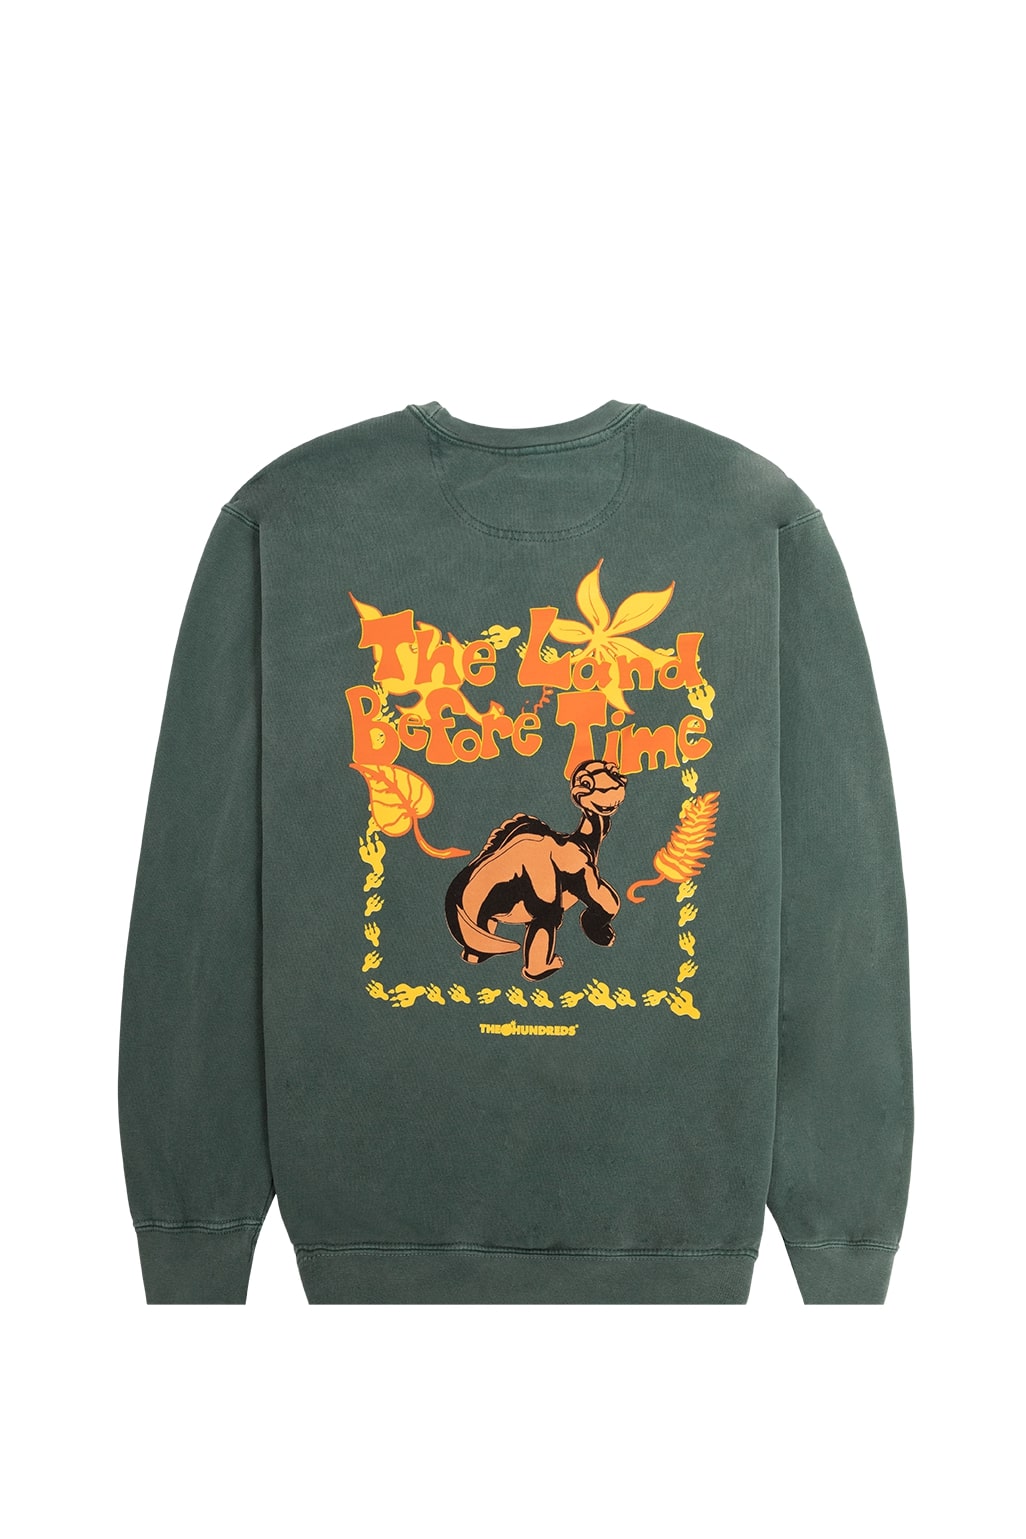 The Hundreds x Land Before Time little foot crewneck